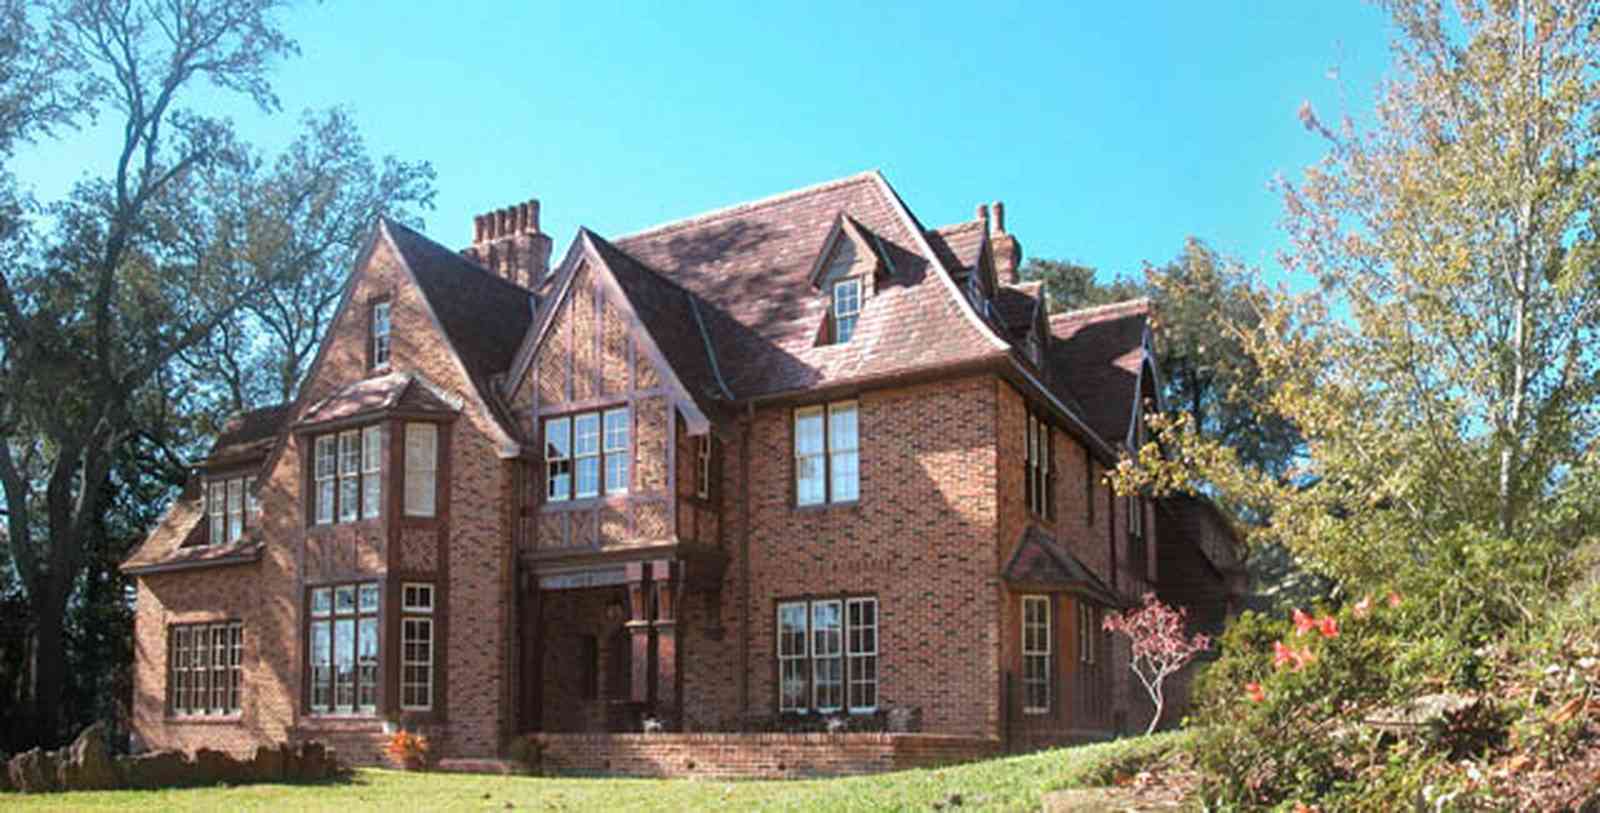 North-Hill:-1125-Spring-Street_02b.jpg:  tudor architectural style, gothic revival style, brick house, oak tree, period house